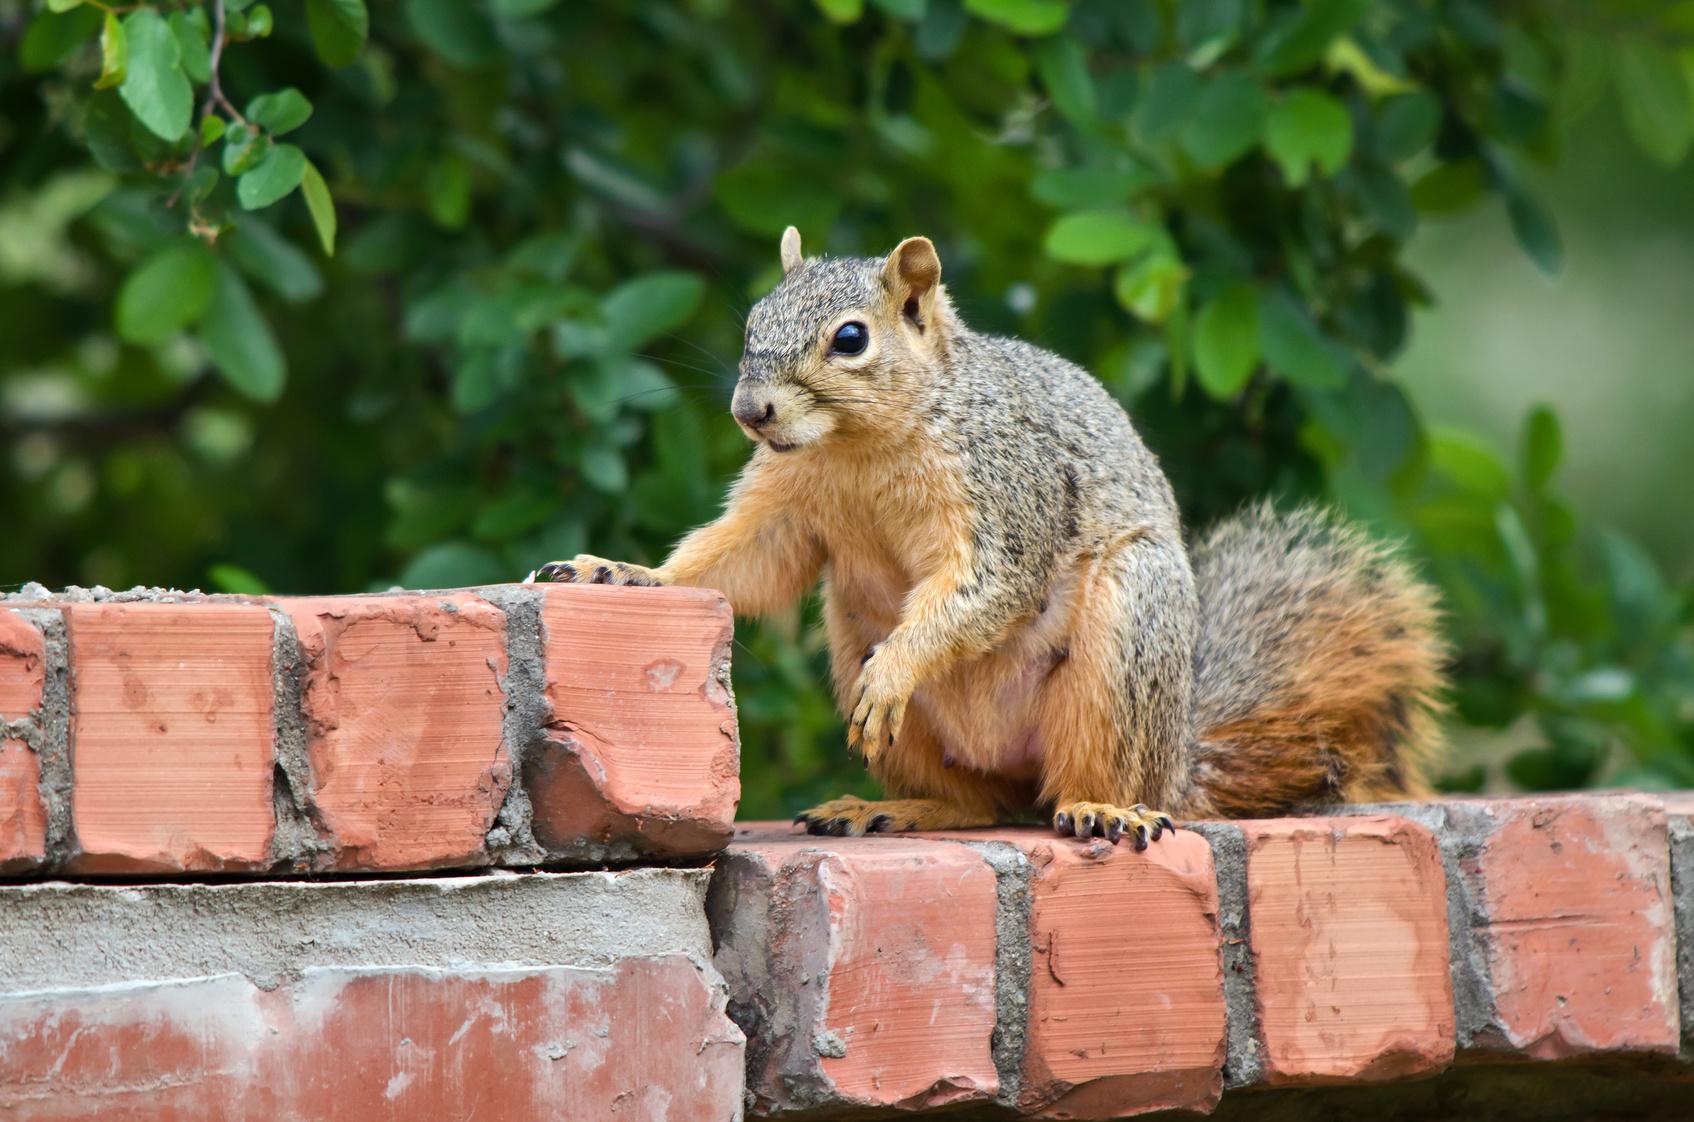 How to get rid of squirrels in the attic